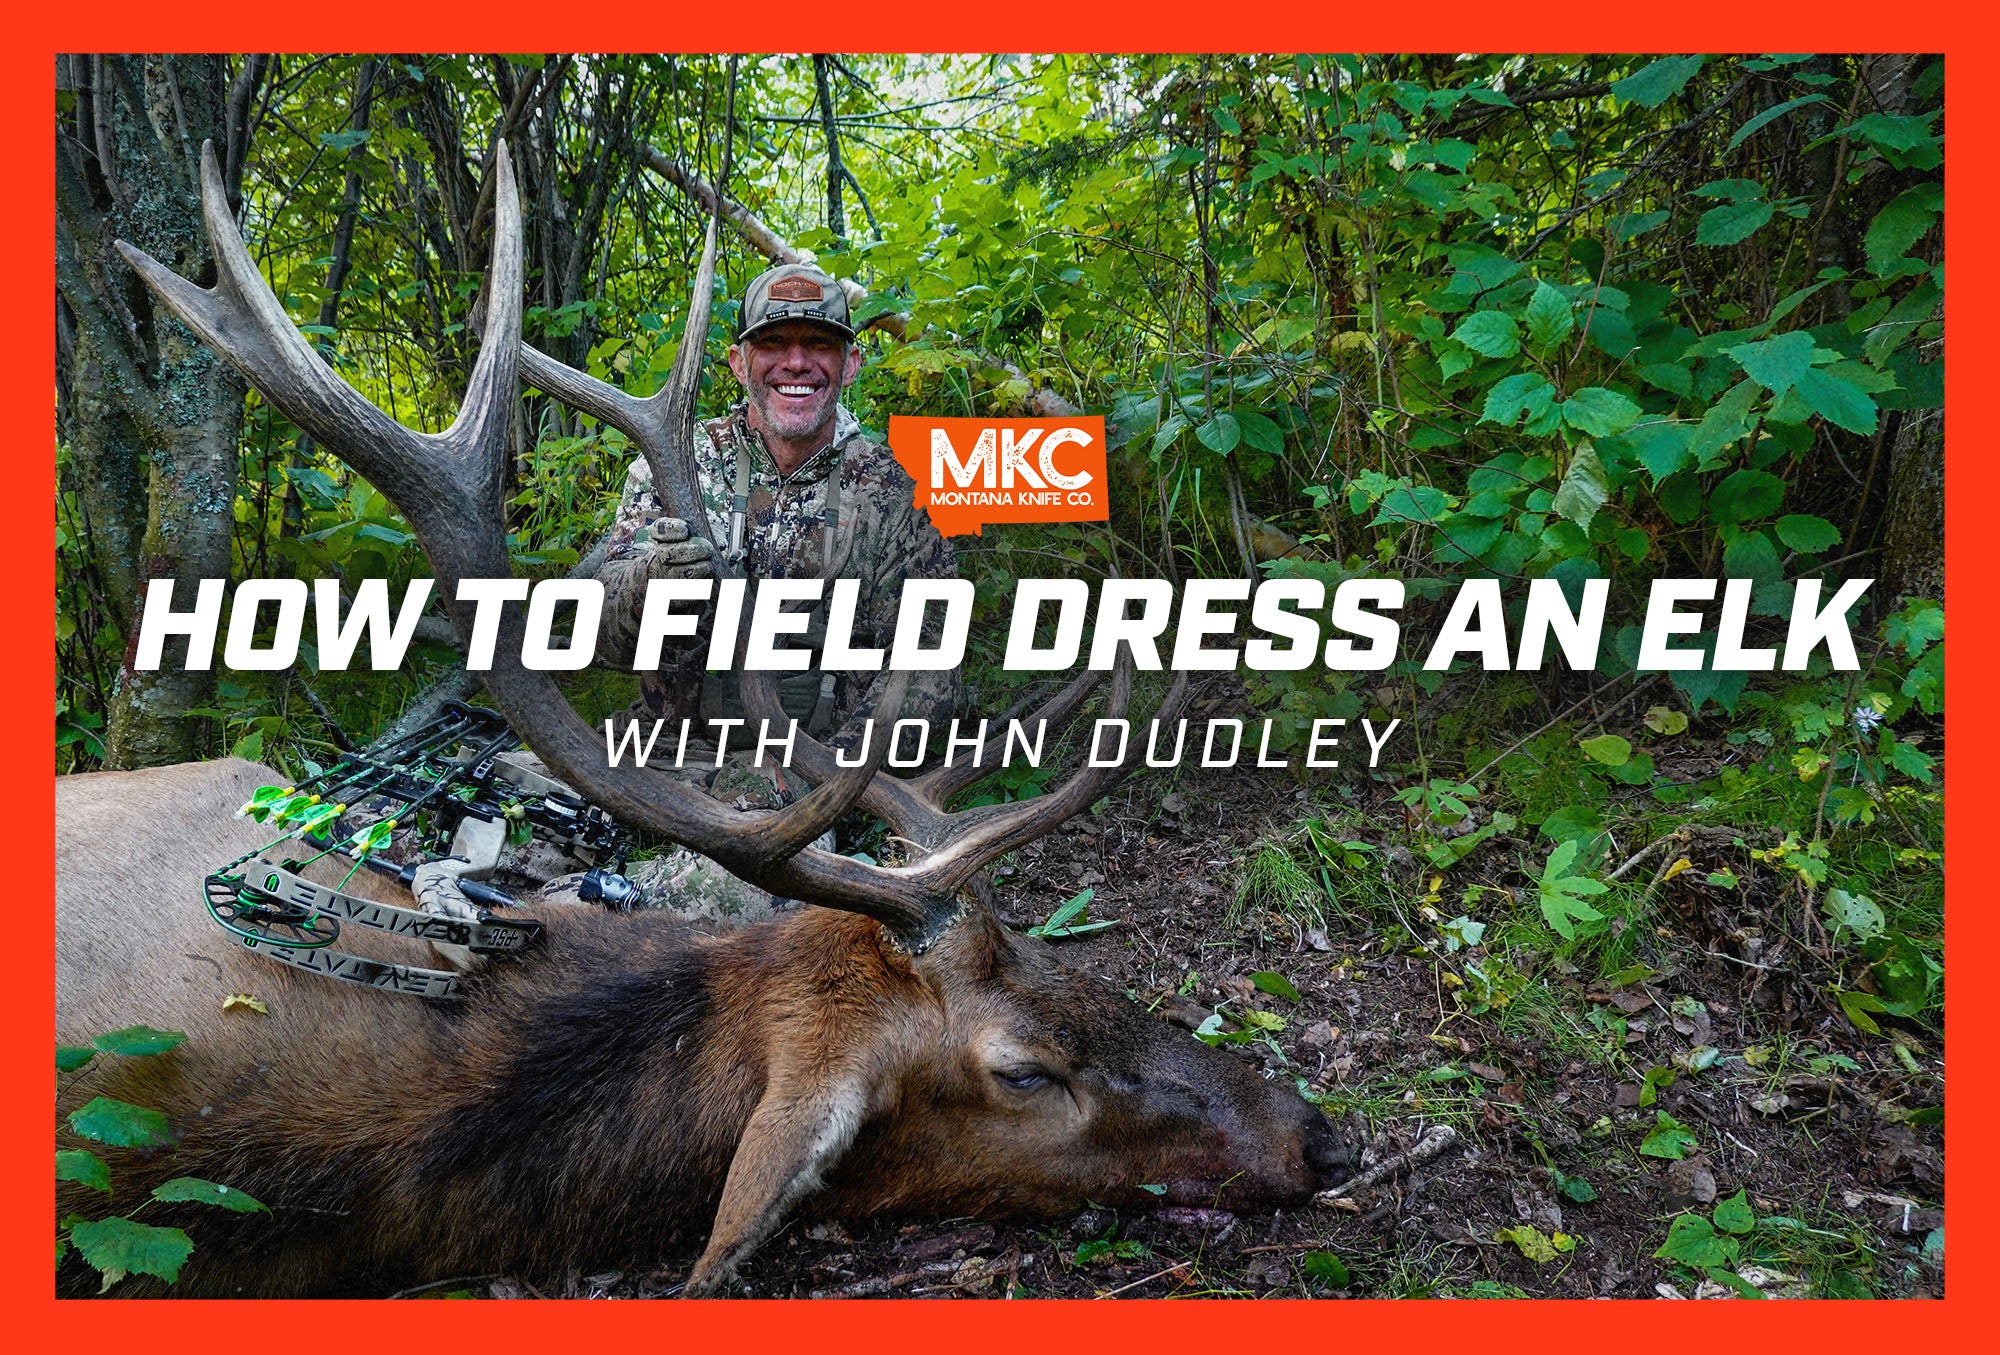 John Dudley smiles and crouches in camo behind his kill as he shares how to field dress an elk.